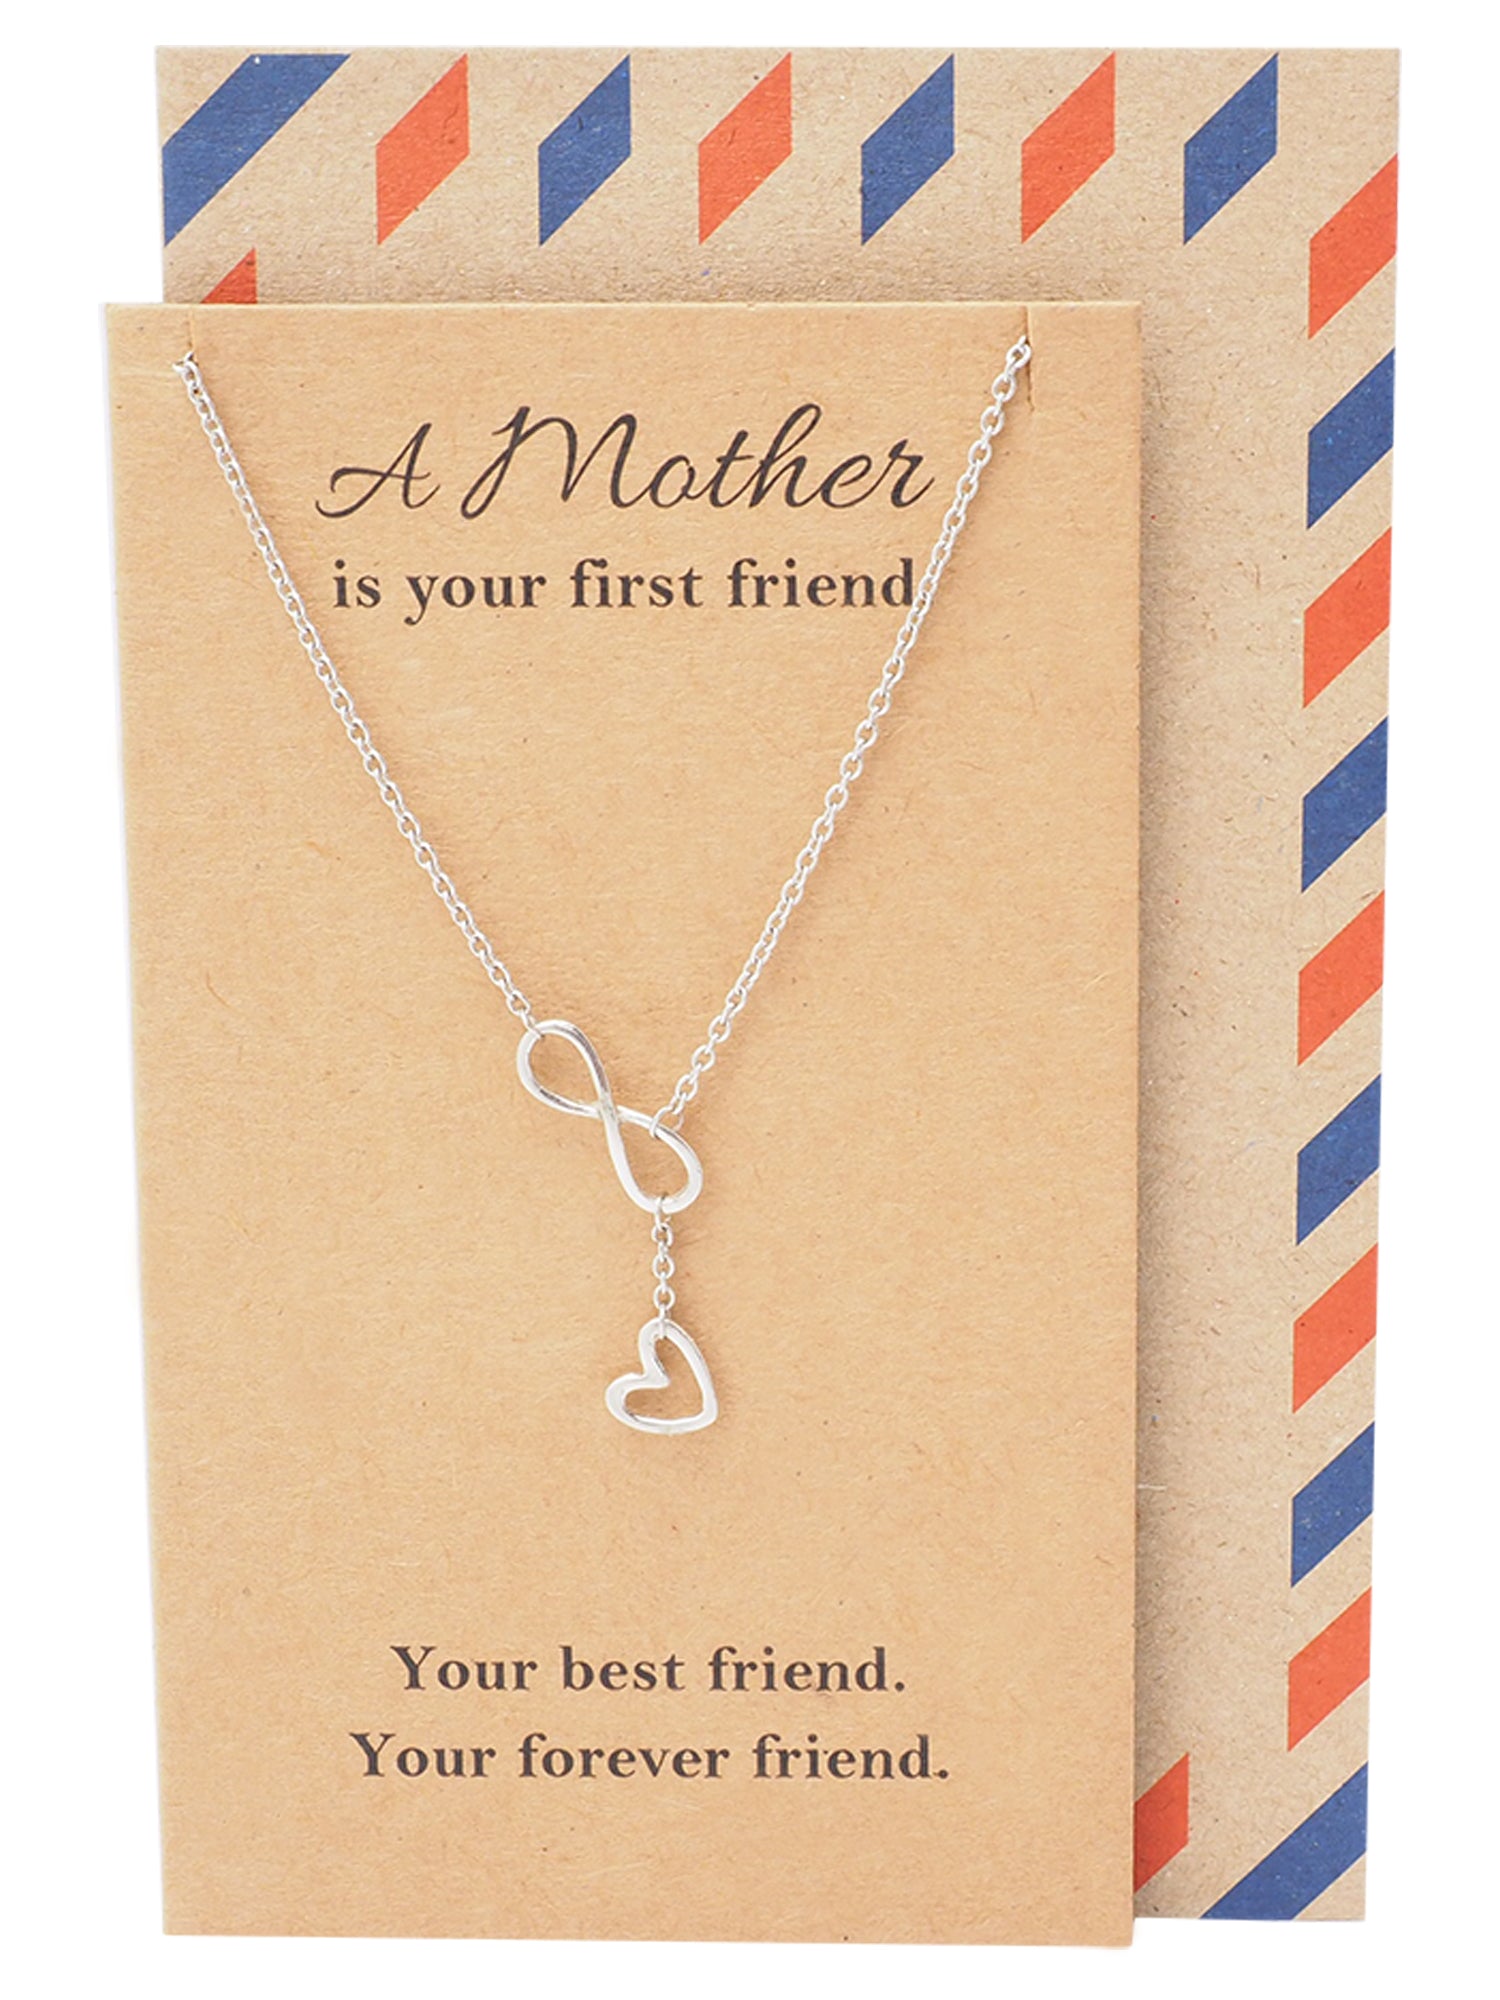 Lorna Infinity Heart Lariat Mothers Necklace, Mothers Day Jewelry